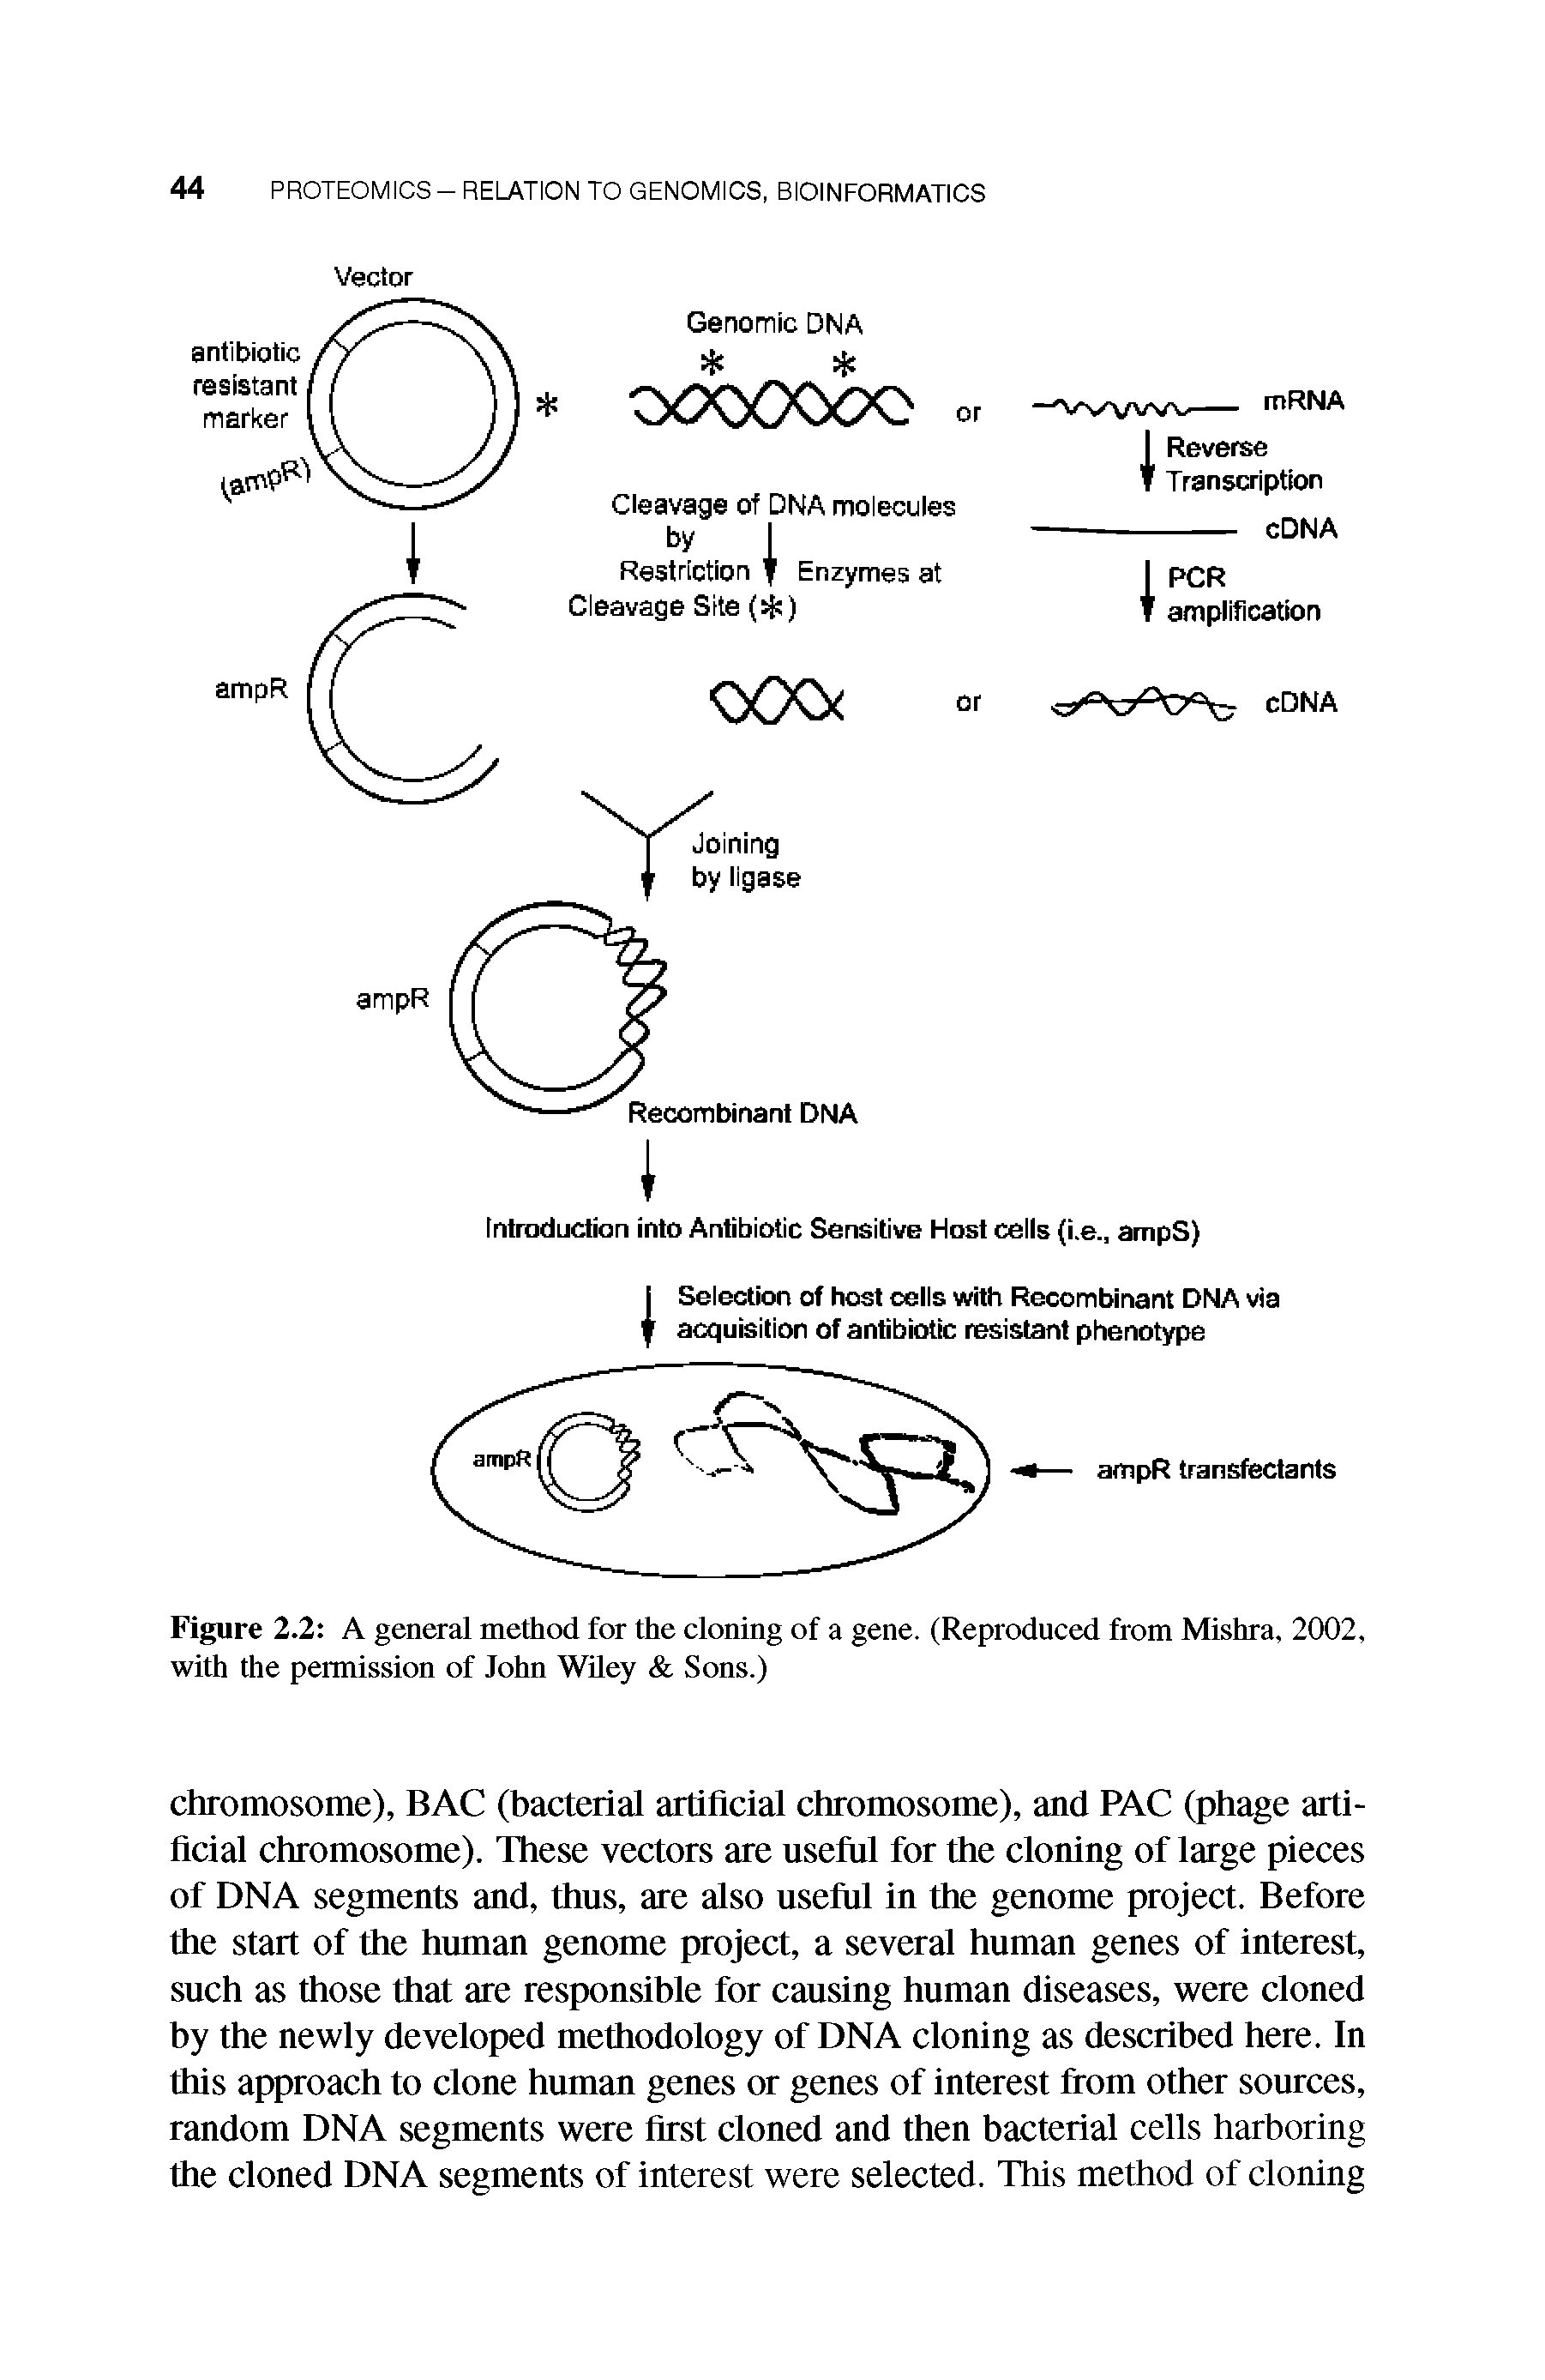 Figure 2.2 A general method for the cloning of a gene. (Reproduced from Mishra, 2002, with the permission of John Wiley Sons.)...